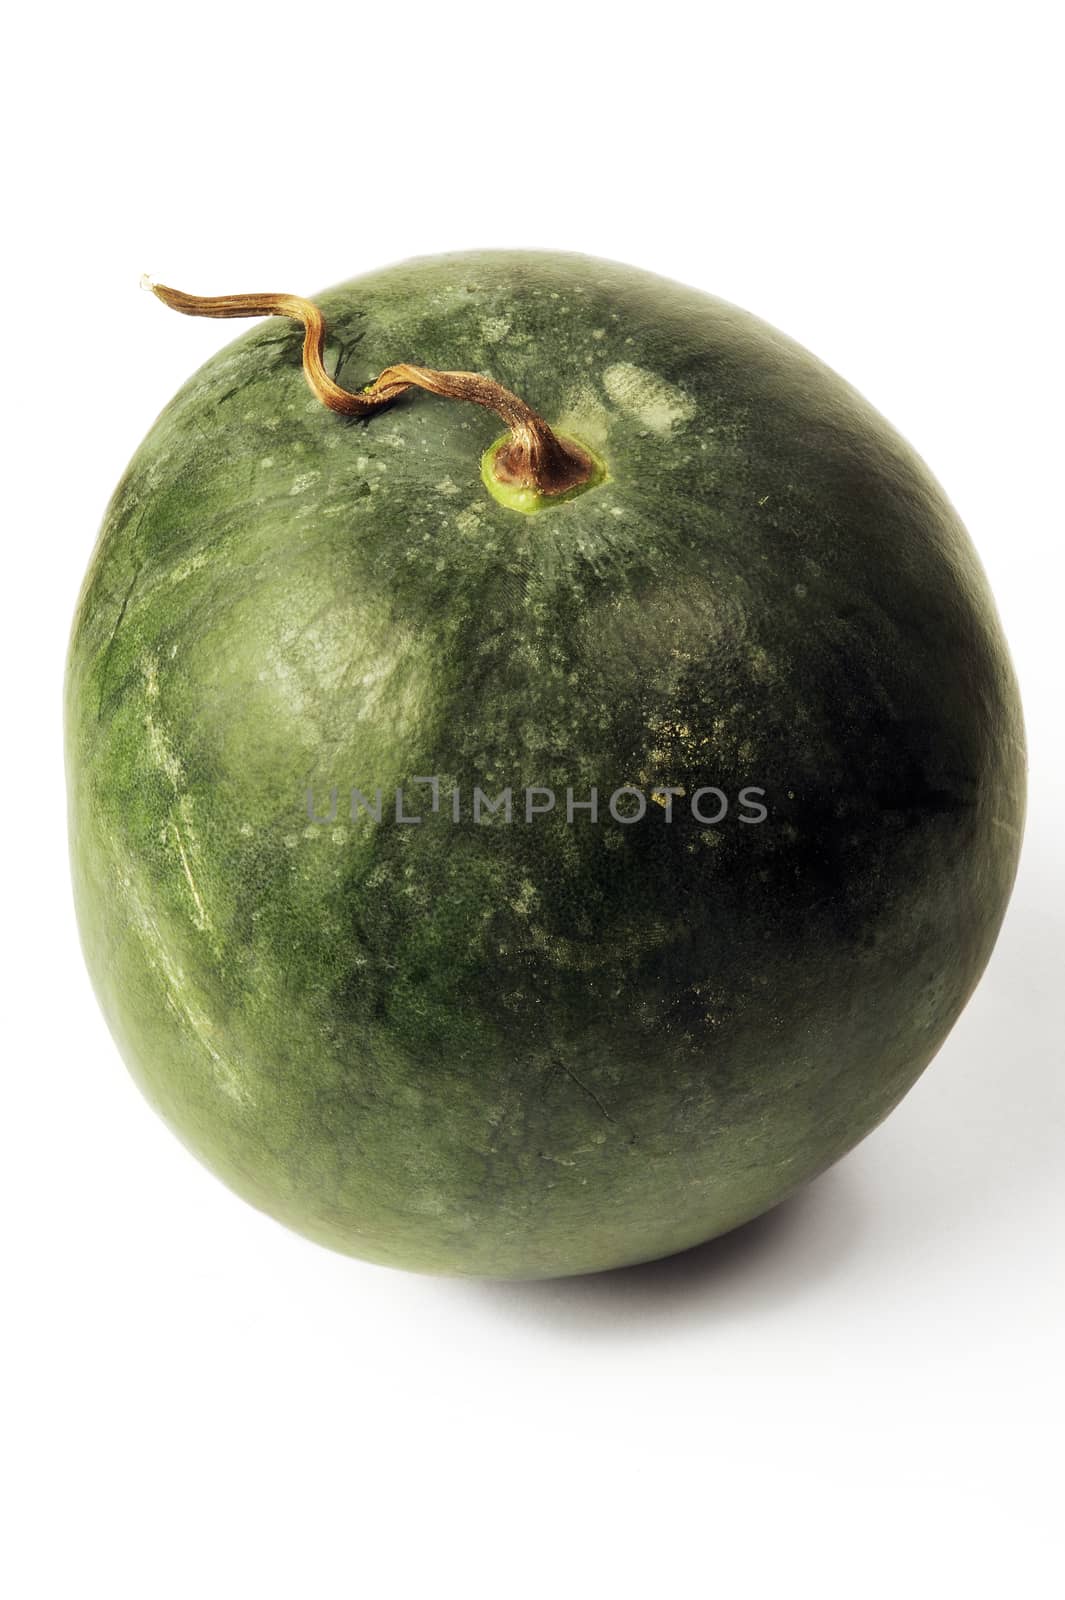 isolated on white background in studio watermelon by gillespaire